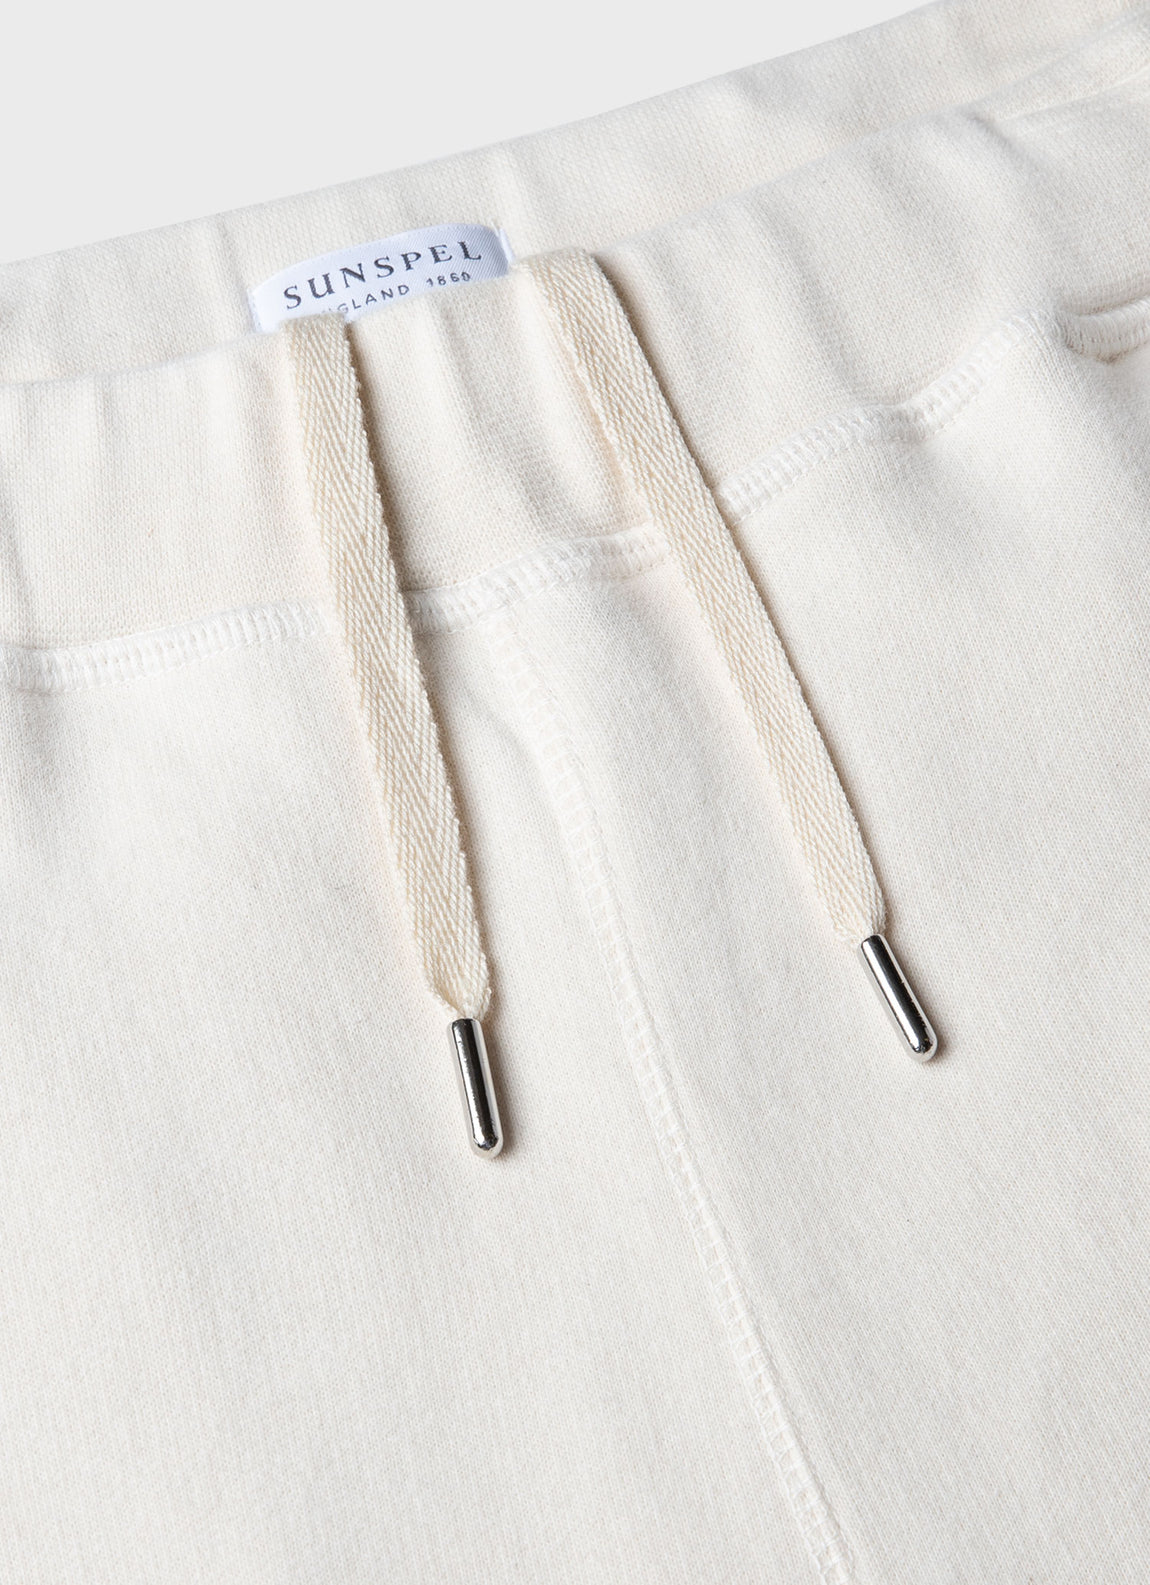 Men's Undyed Loopback Sweatpants in Undyed